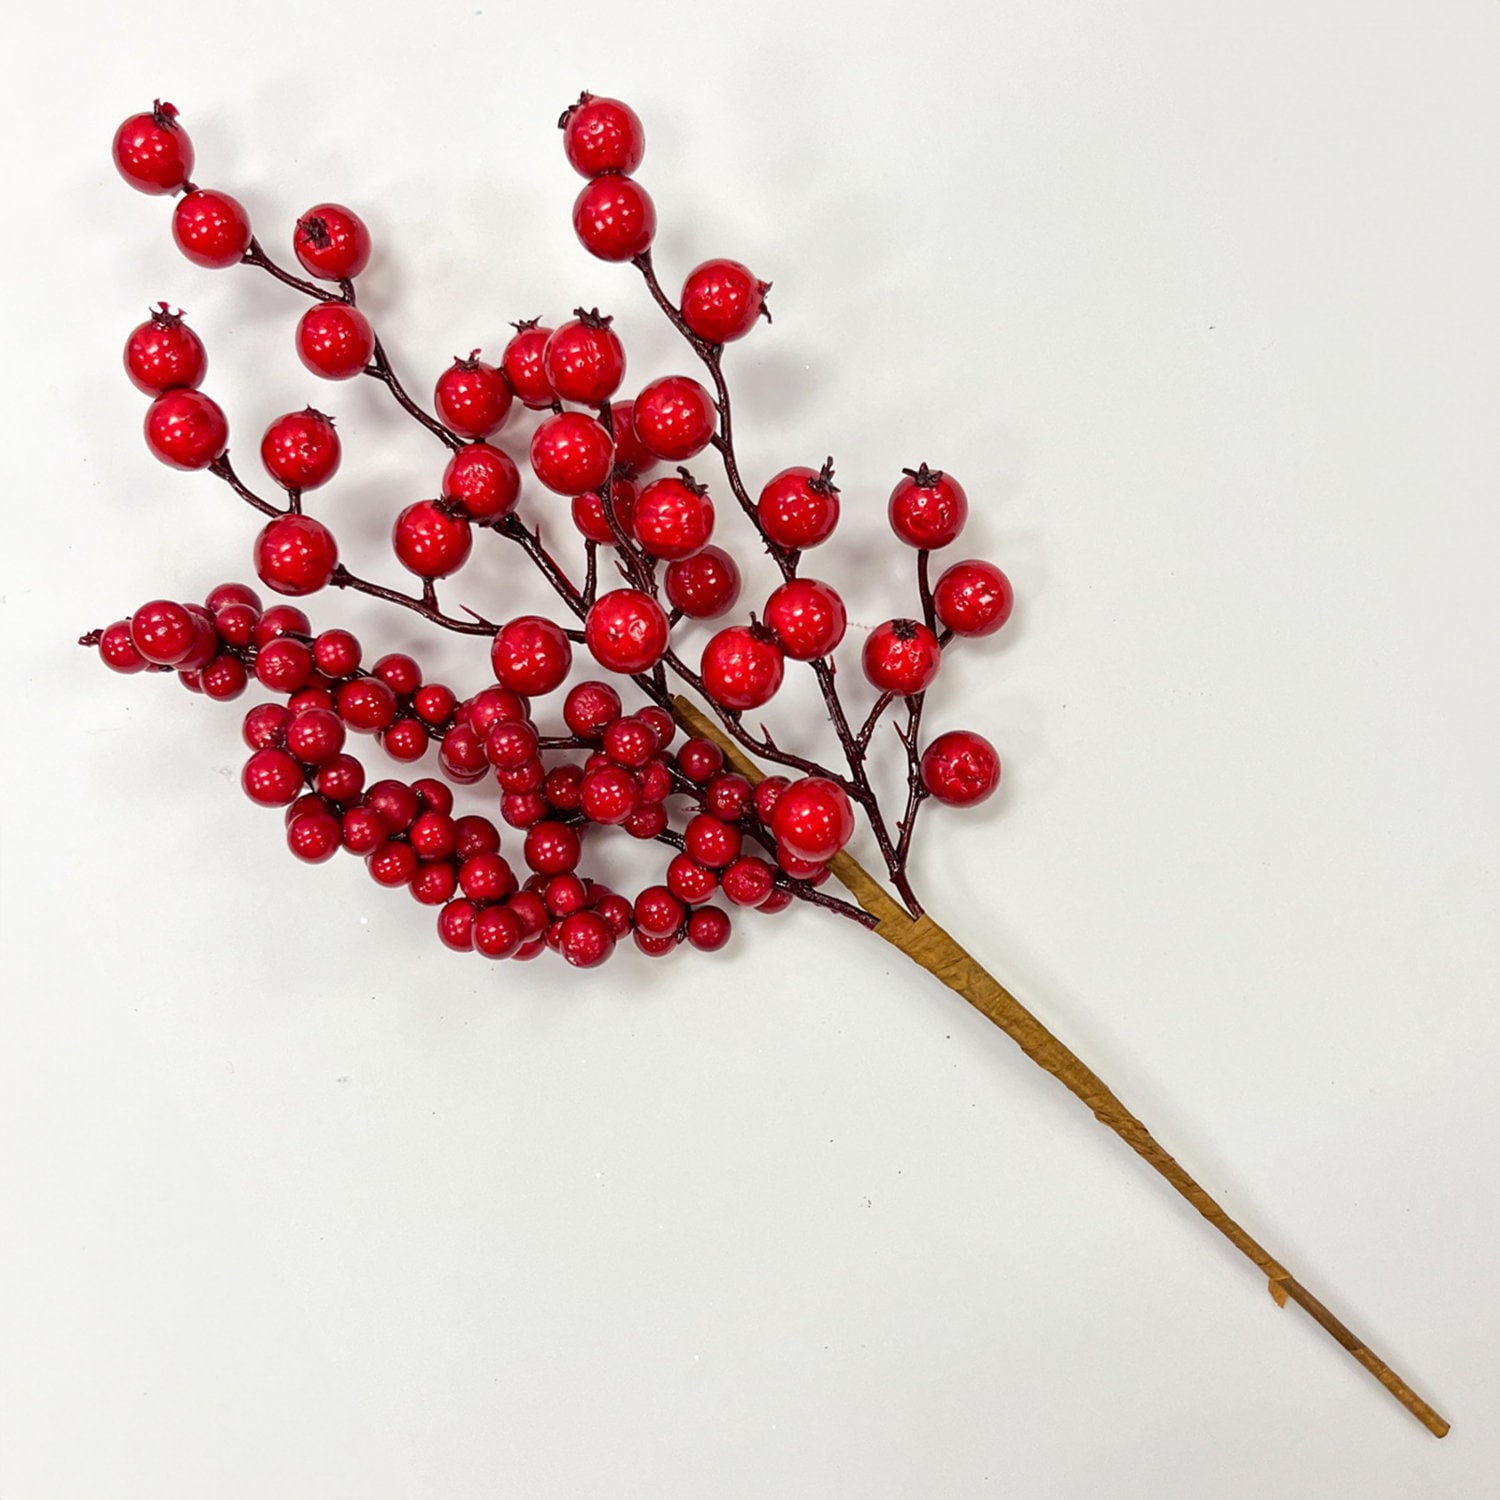 Fangoo 6 Pack Artificial Red Berry Stems,50 CM Long Christmas Red